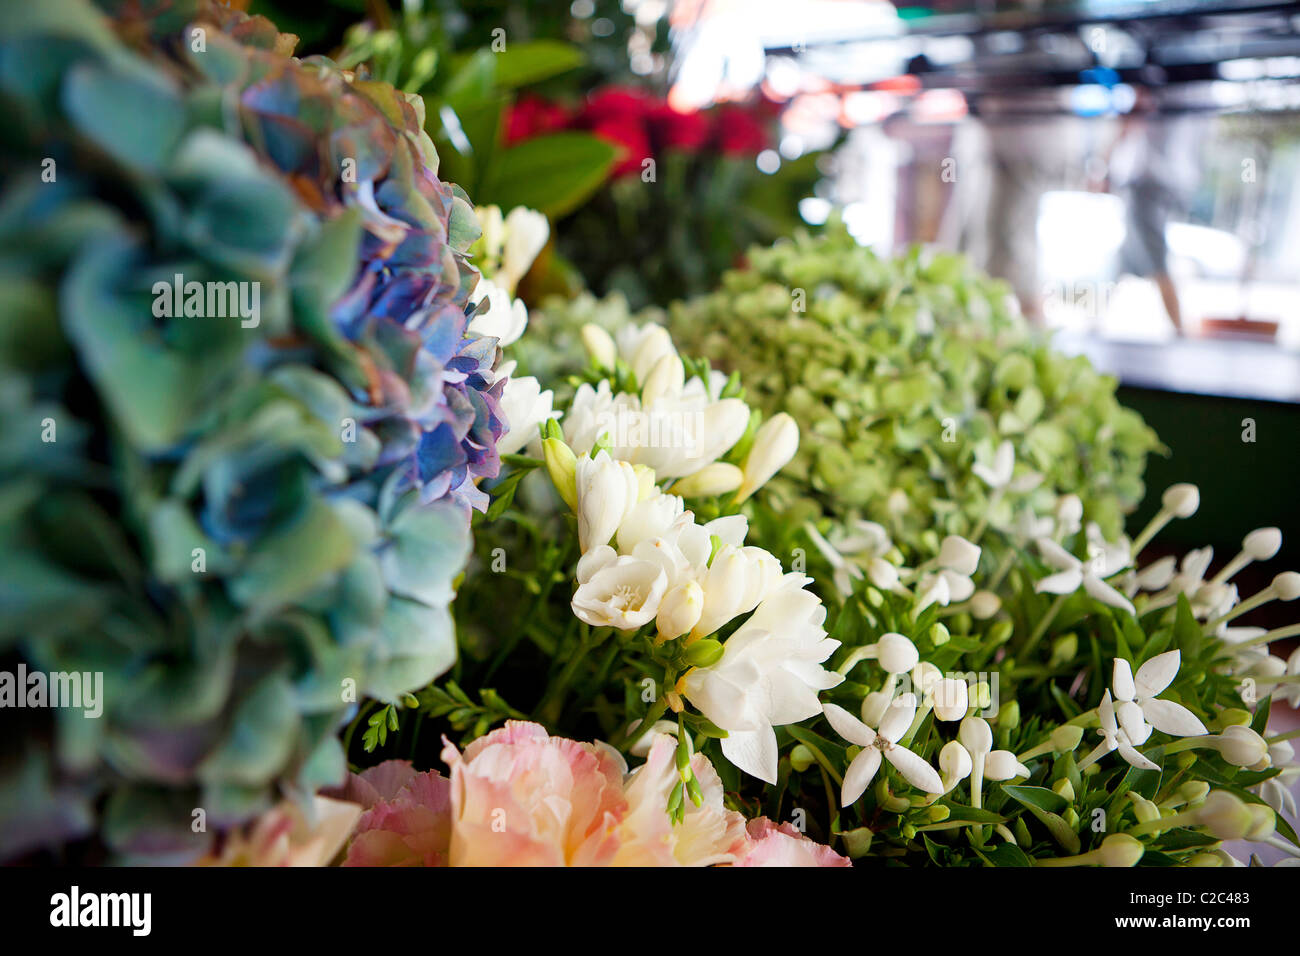 Bunches of flowers at flower shop Stock Photo